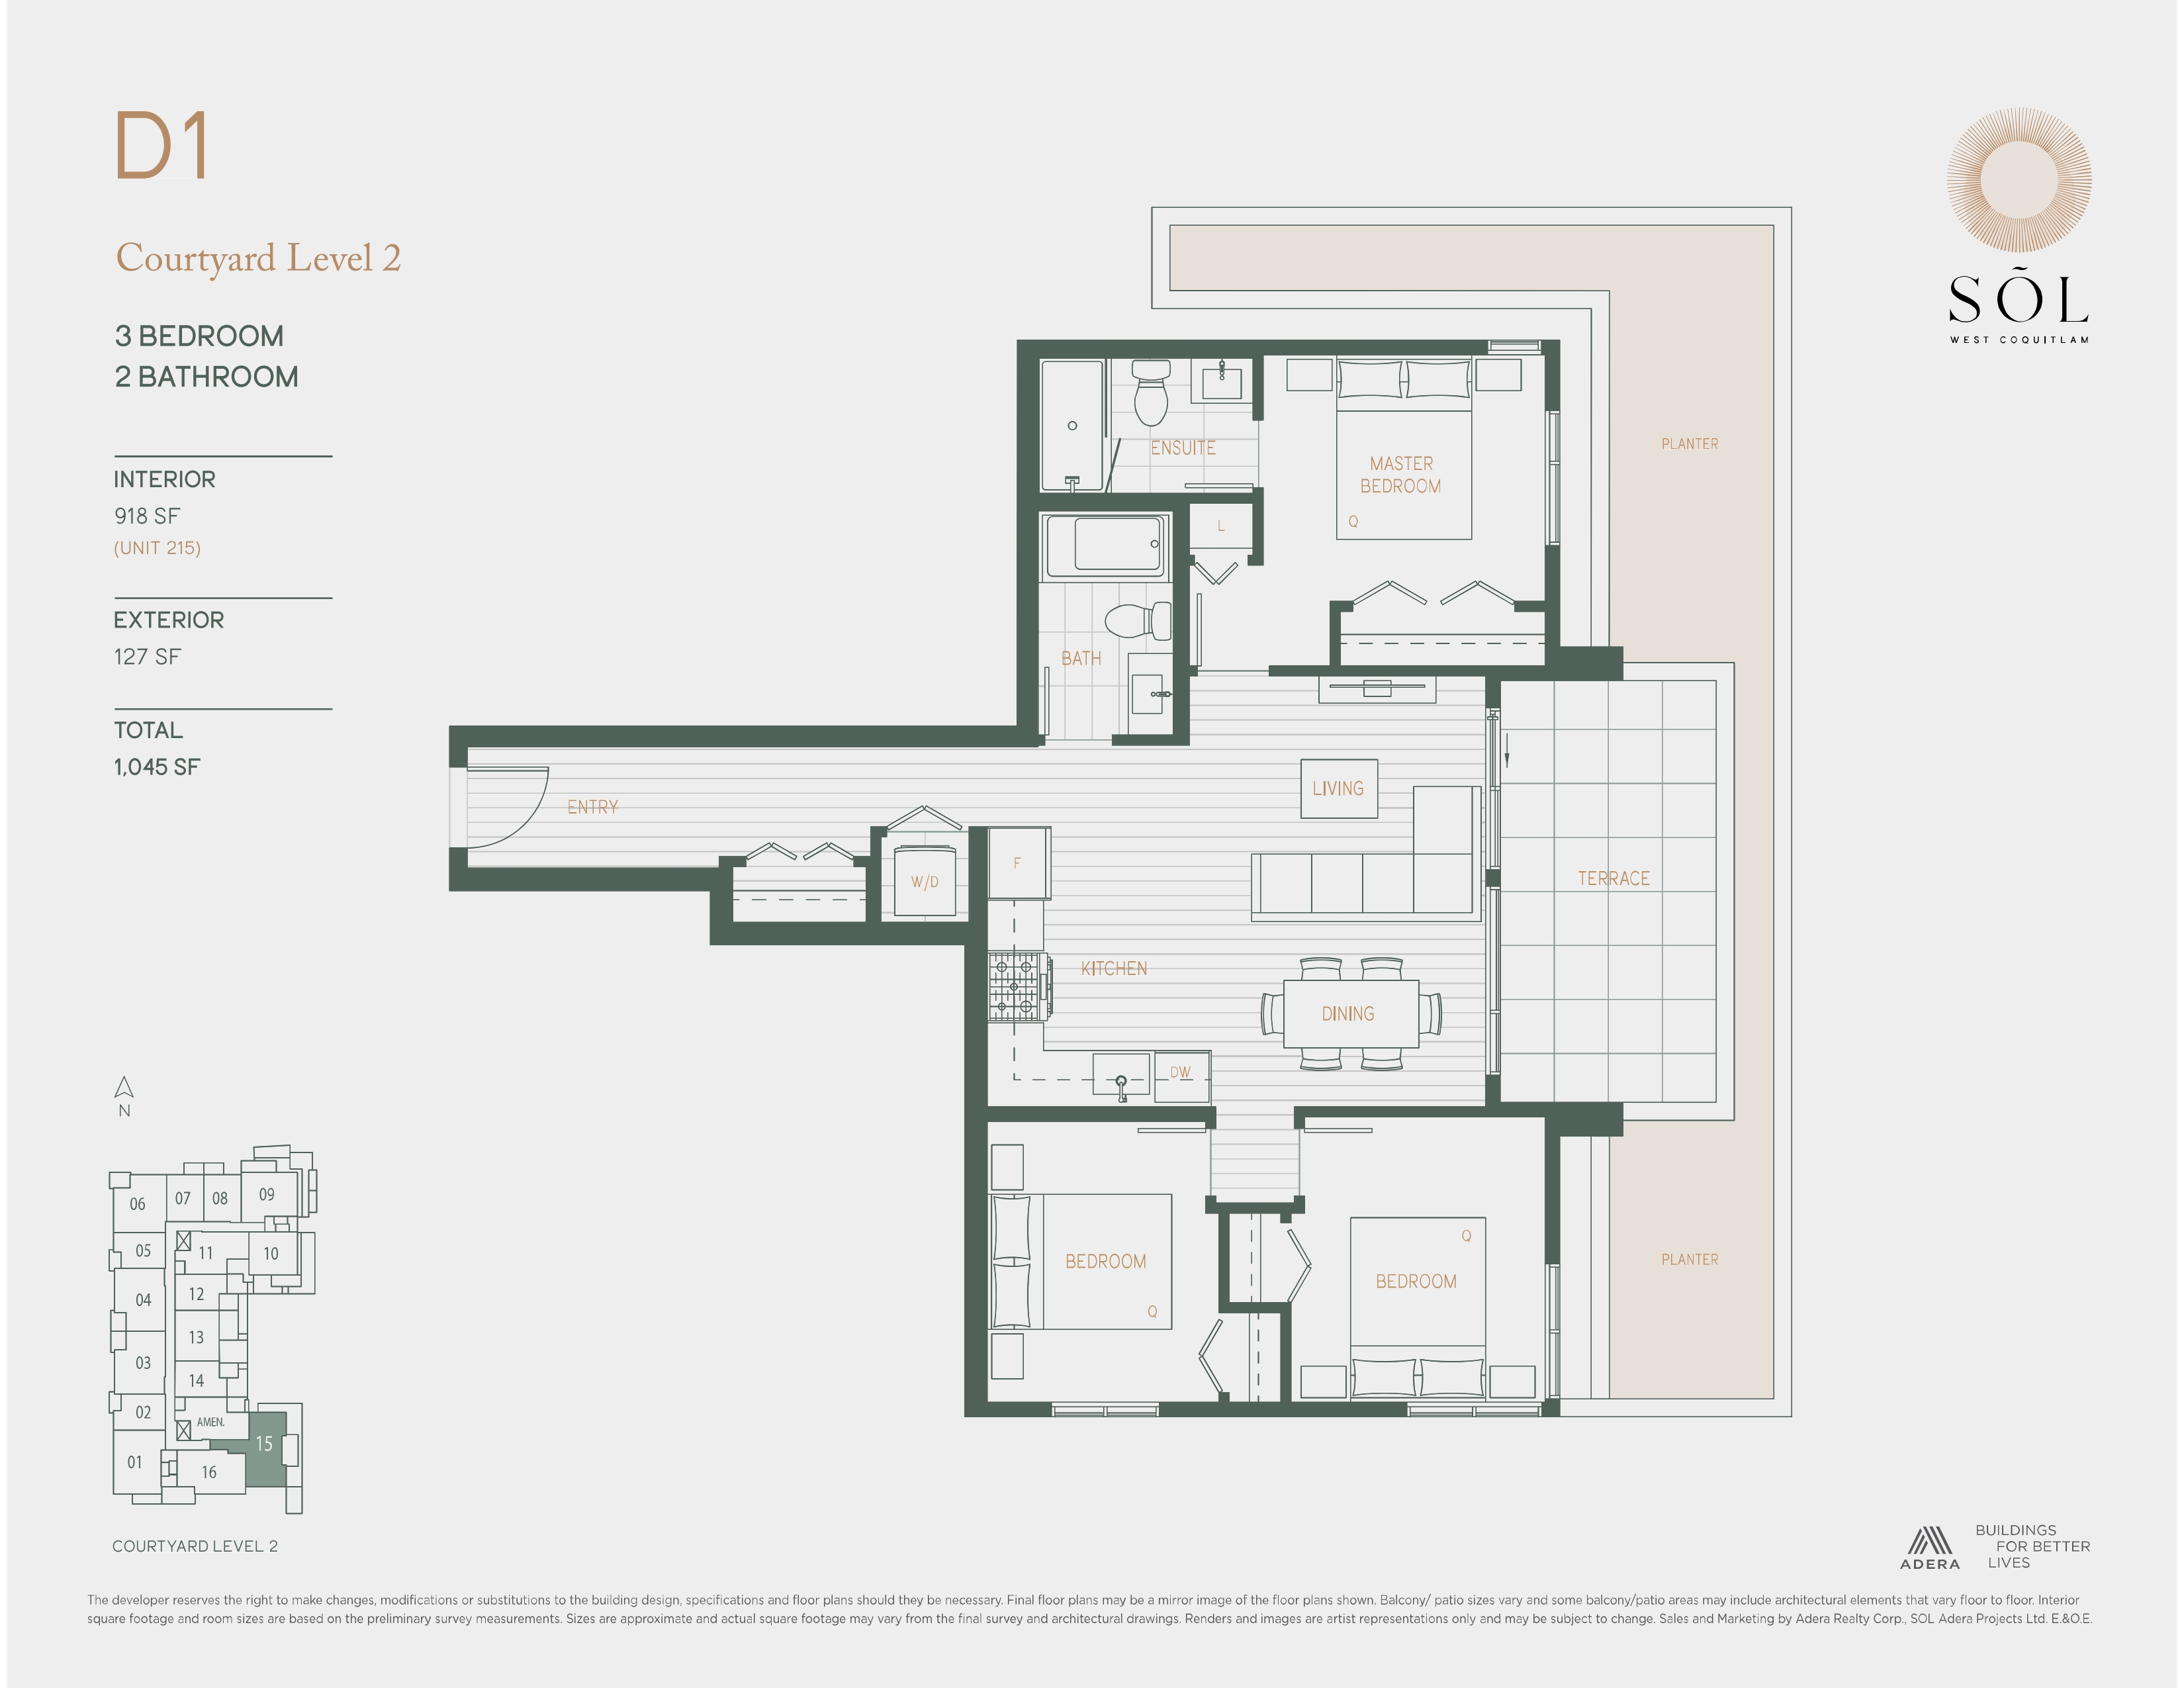  Floor Plan of Sol Condos with undefined beds